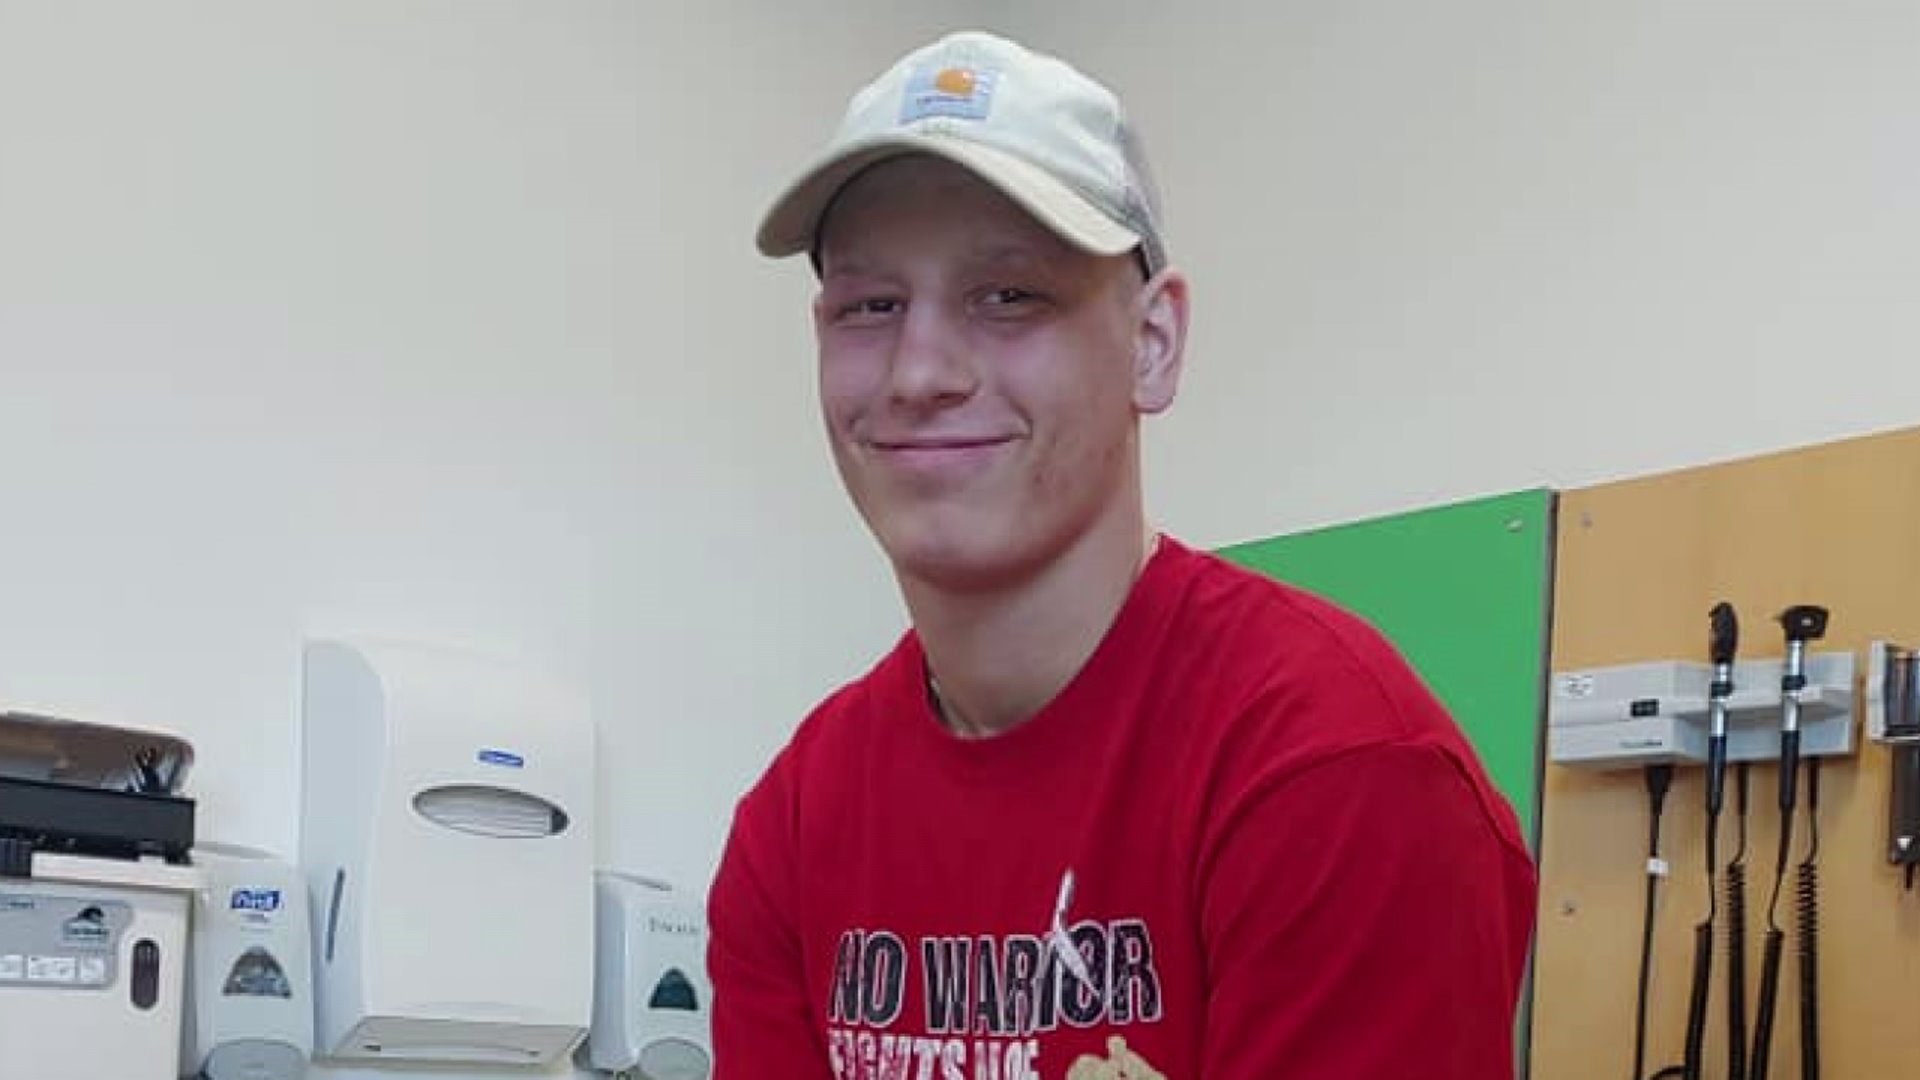 One high school junior is making an impact after his battle with cancer